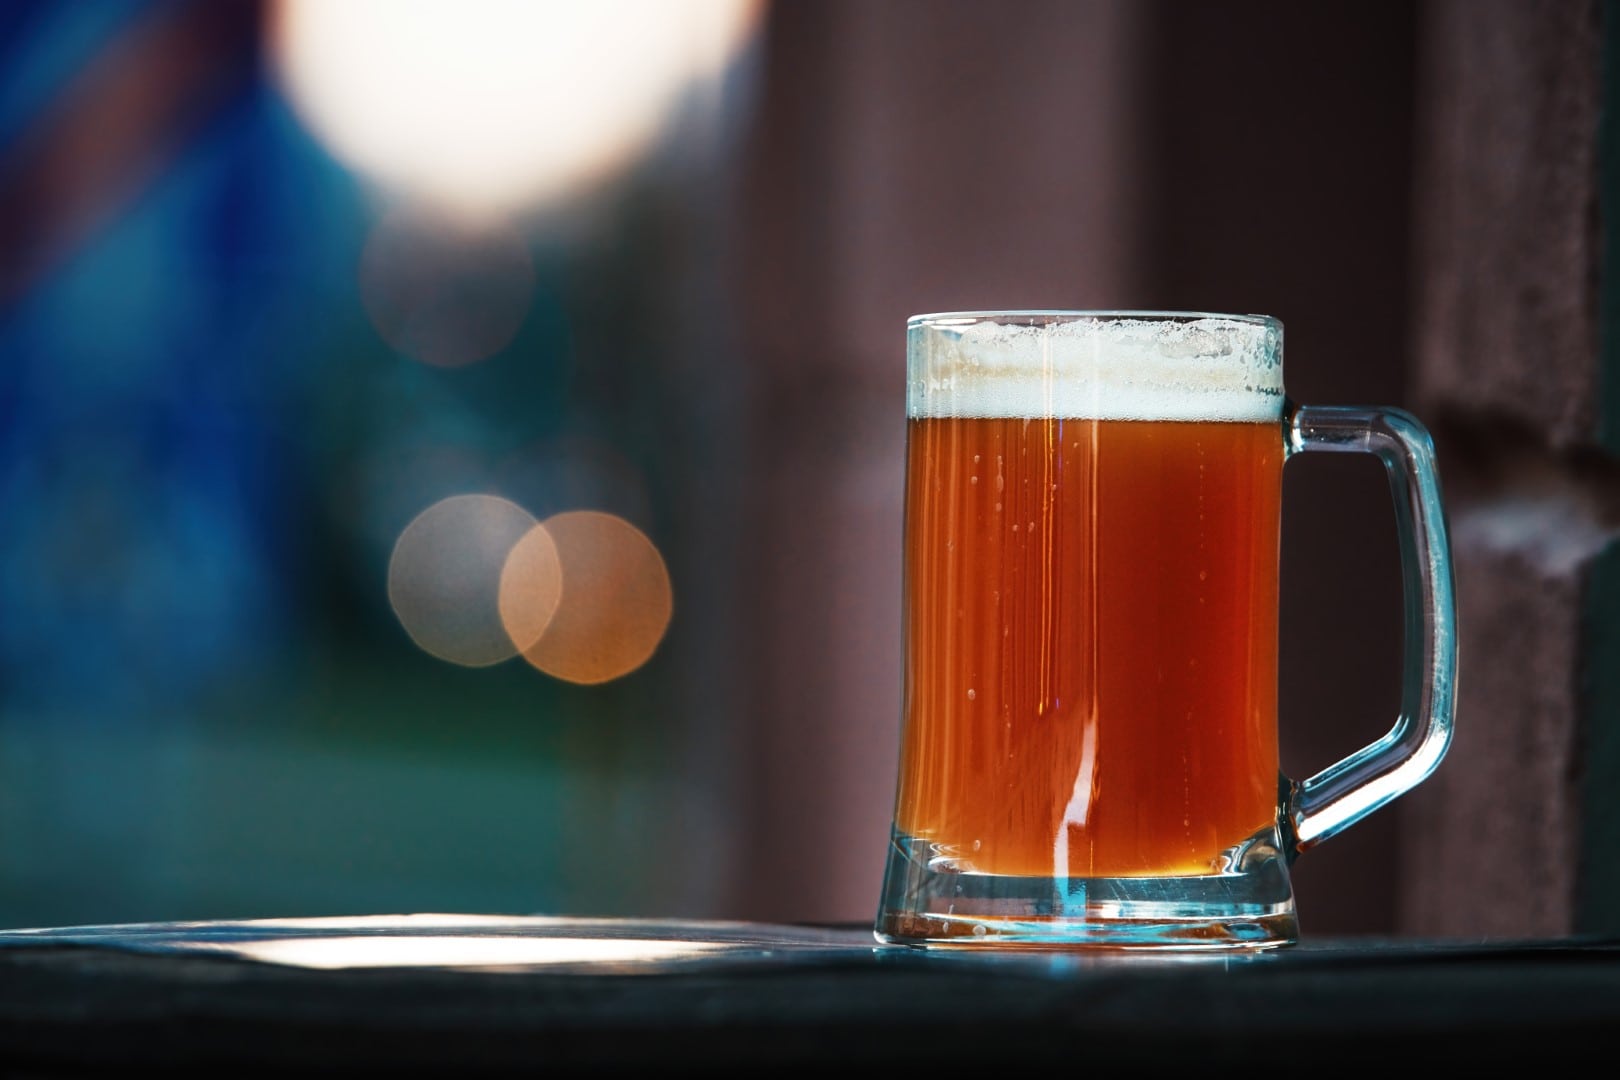 Cold beer mug with foam at sunset. Beer glass of red ale. Glass of dark beer standing on the bar of summer terrace seducing people to go to the pub and try foamy alcoholic drink, street background